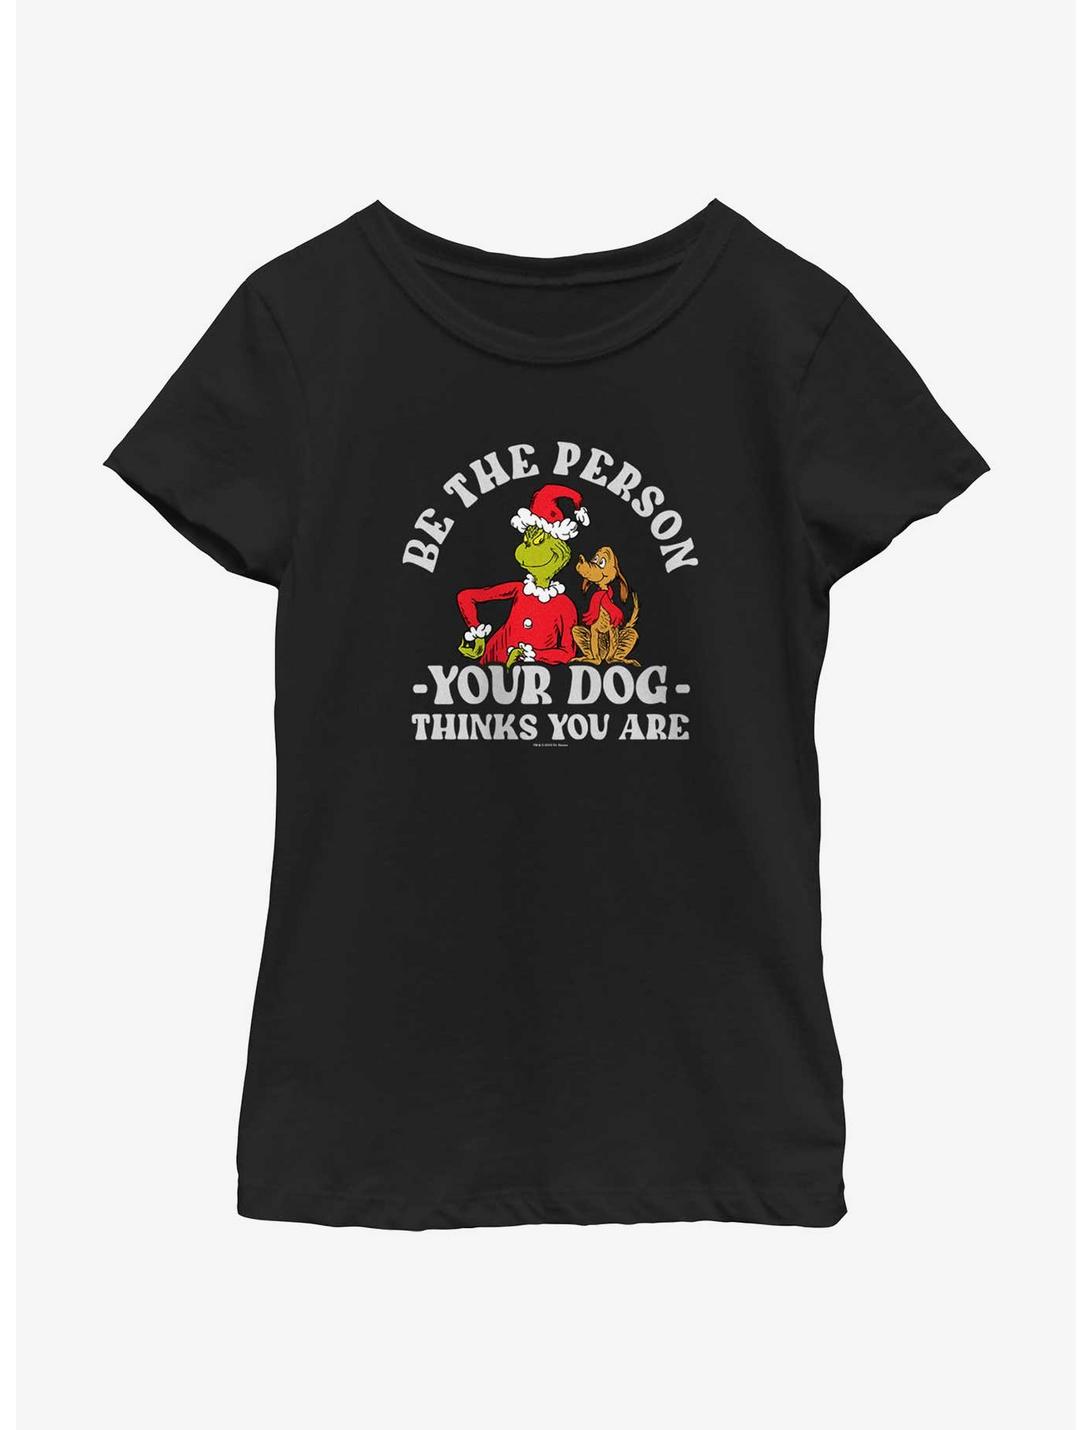 Dr. Seuss Grinch and Max Be The Person Your Dog Thinks You Are Youth Girls T-Shirt, BLACK, hi-res